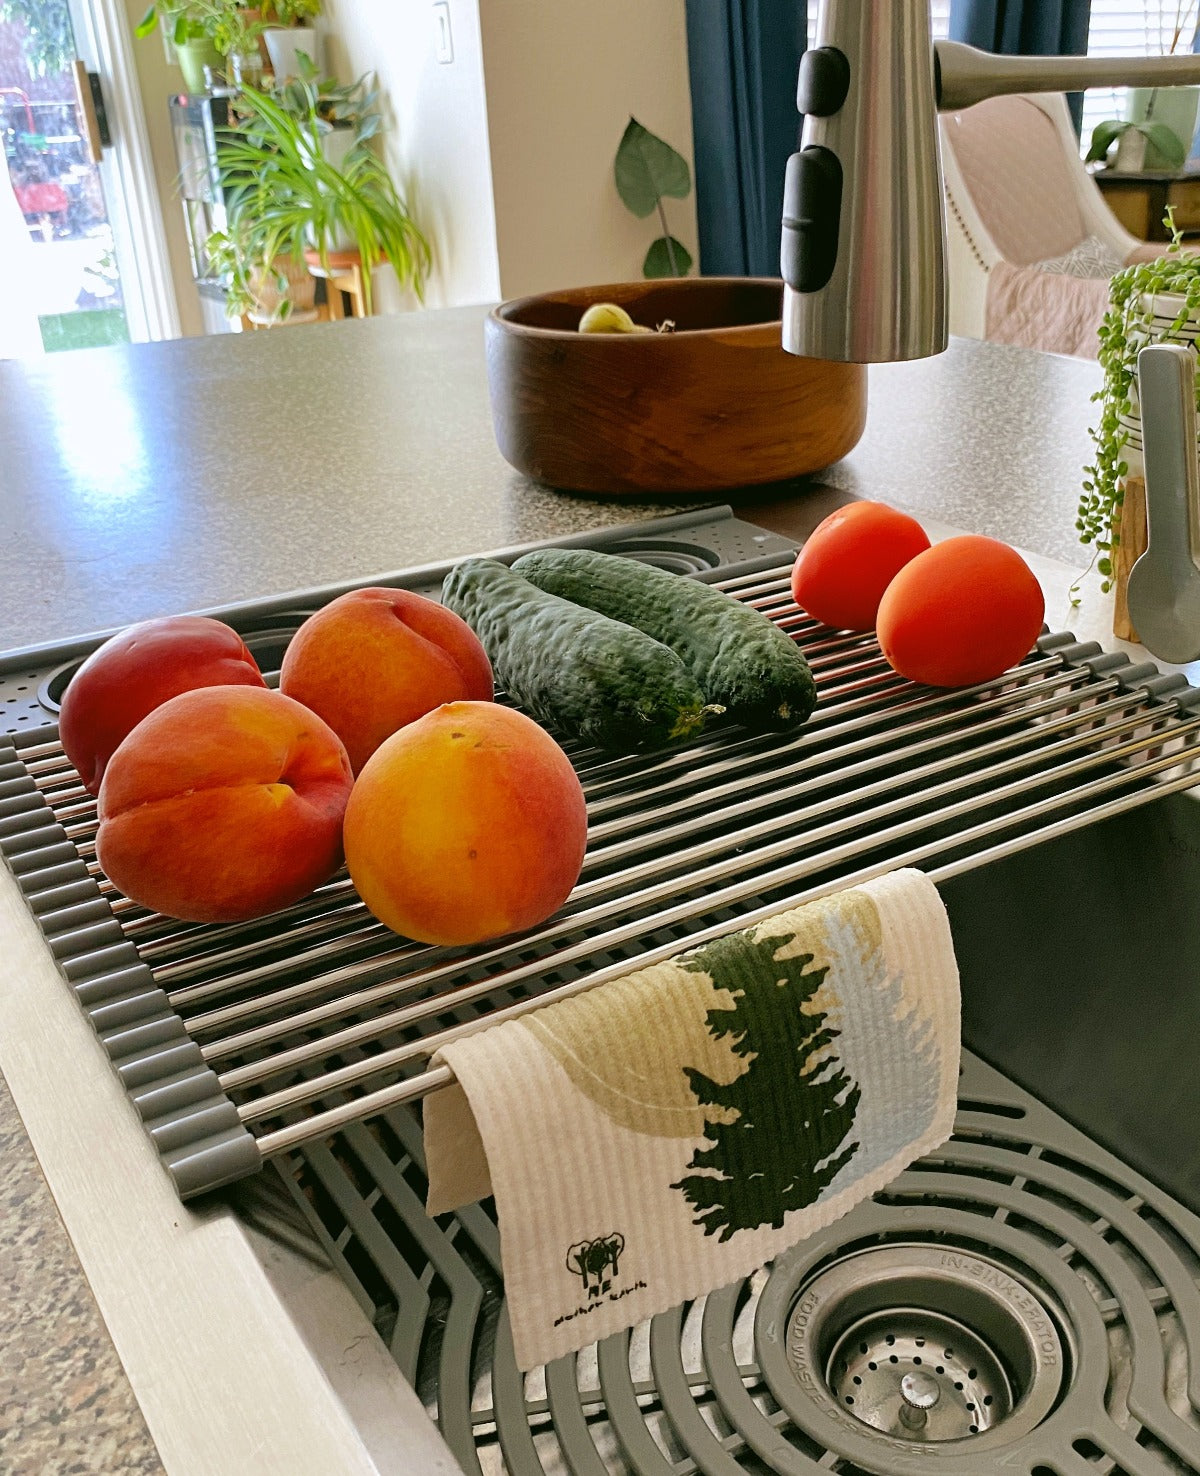 Stainless-steel Roll Up Dish Drying Mat, for easy storage, Dishwasher safe